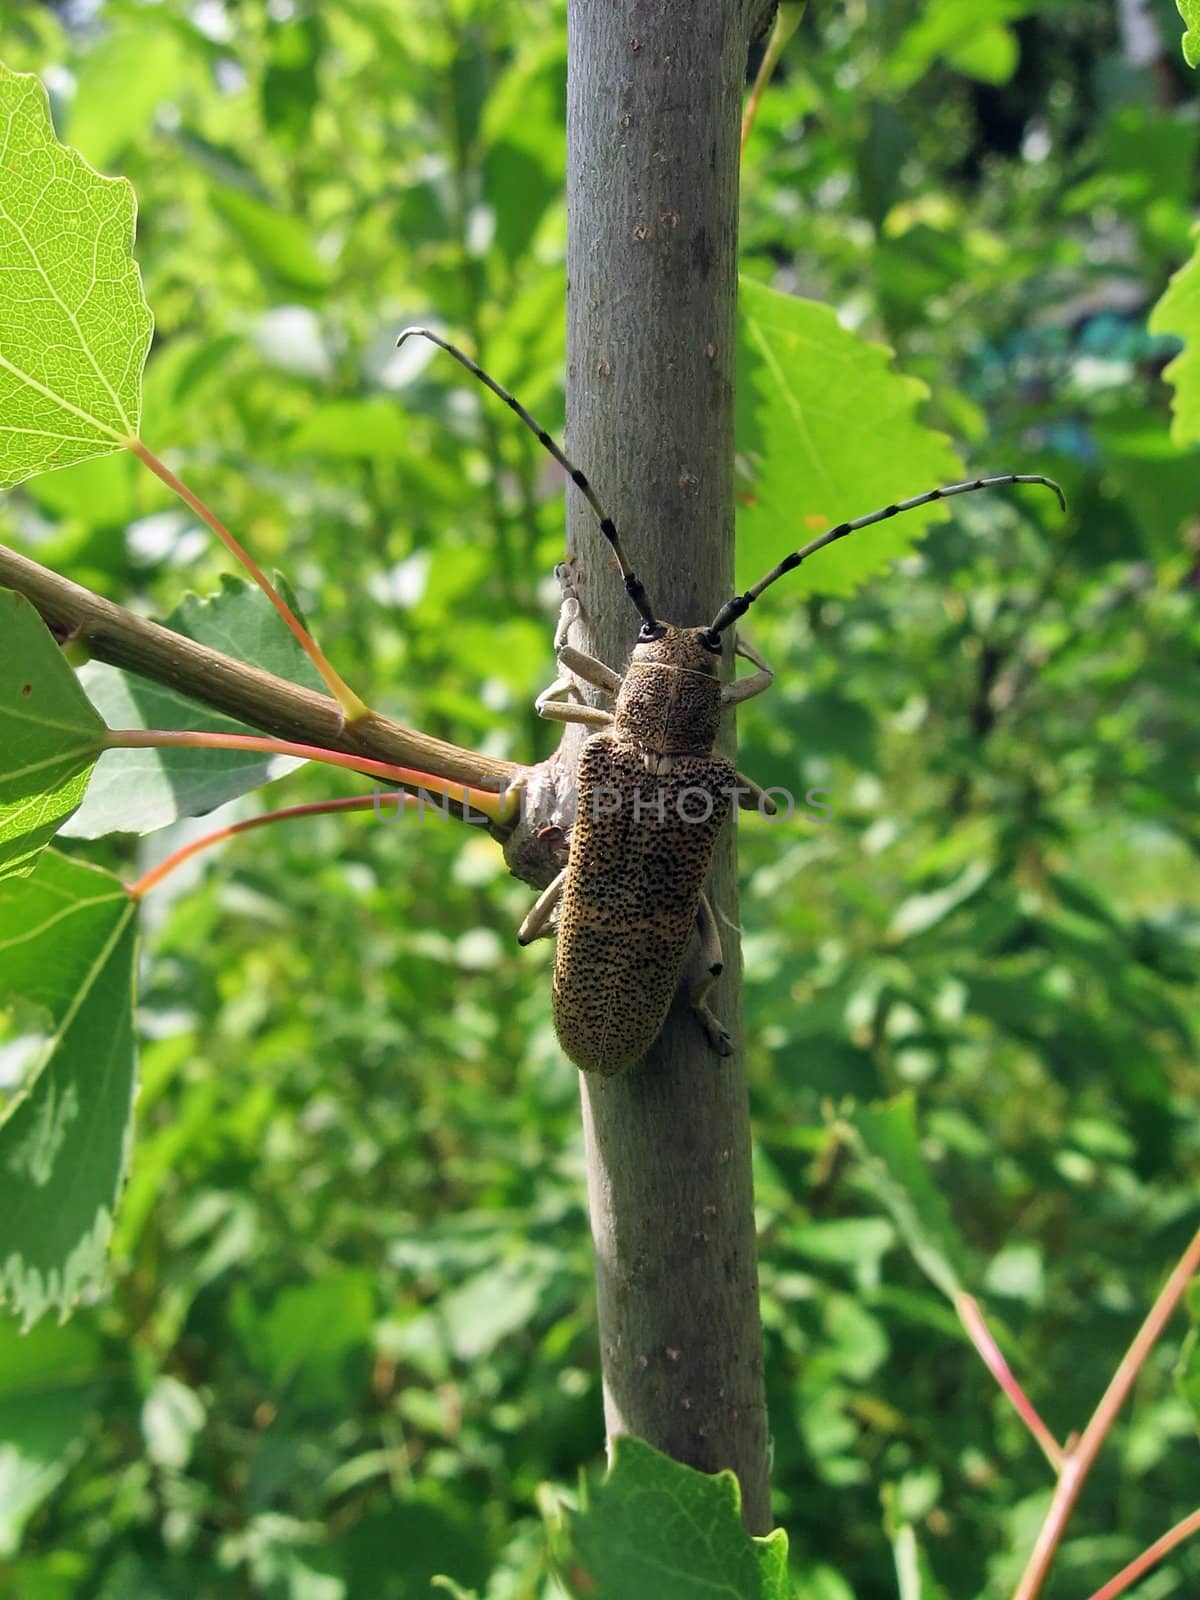 Large beetle on the tree by tomatto